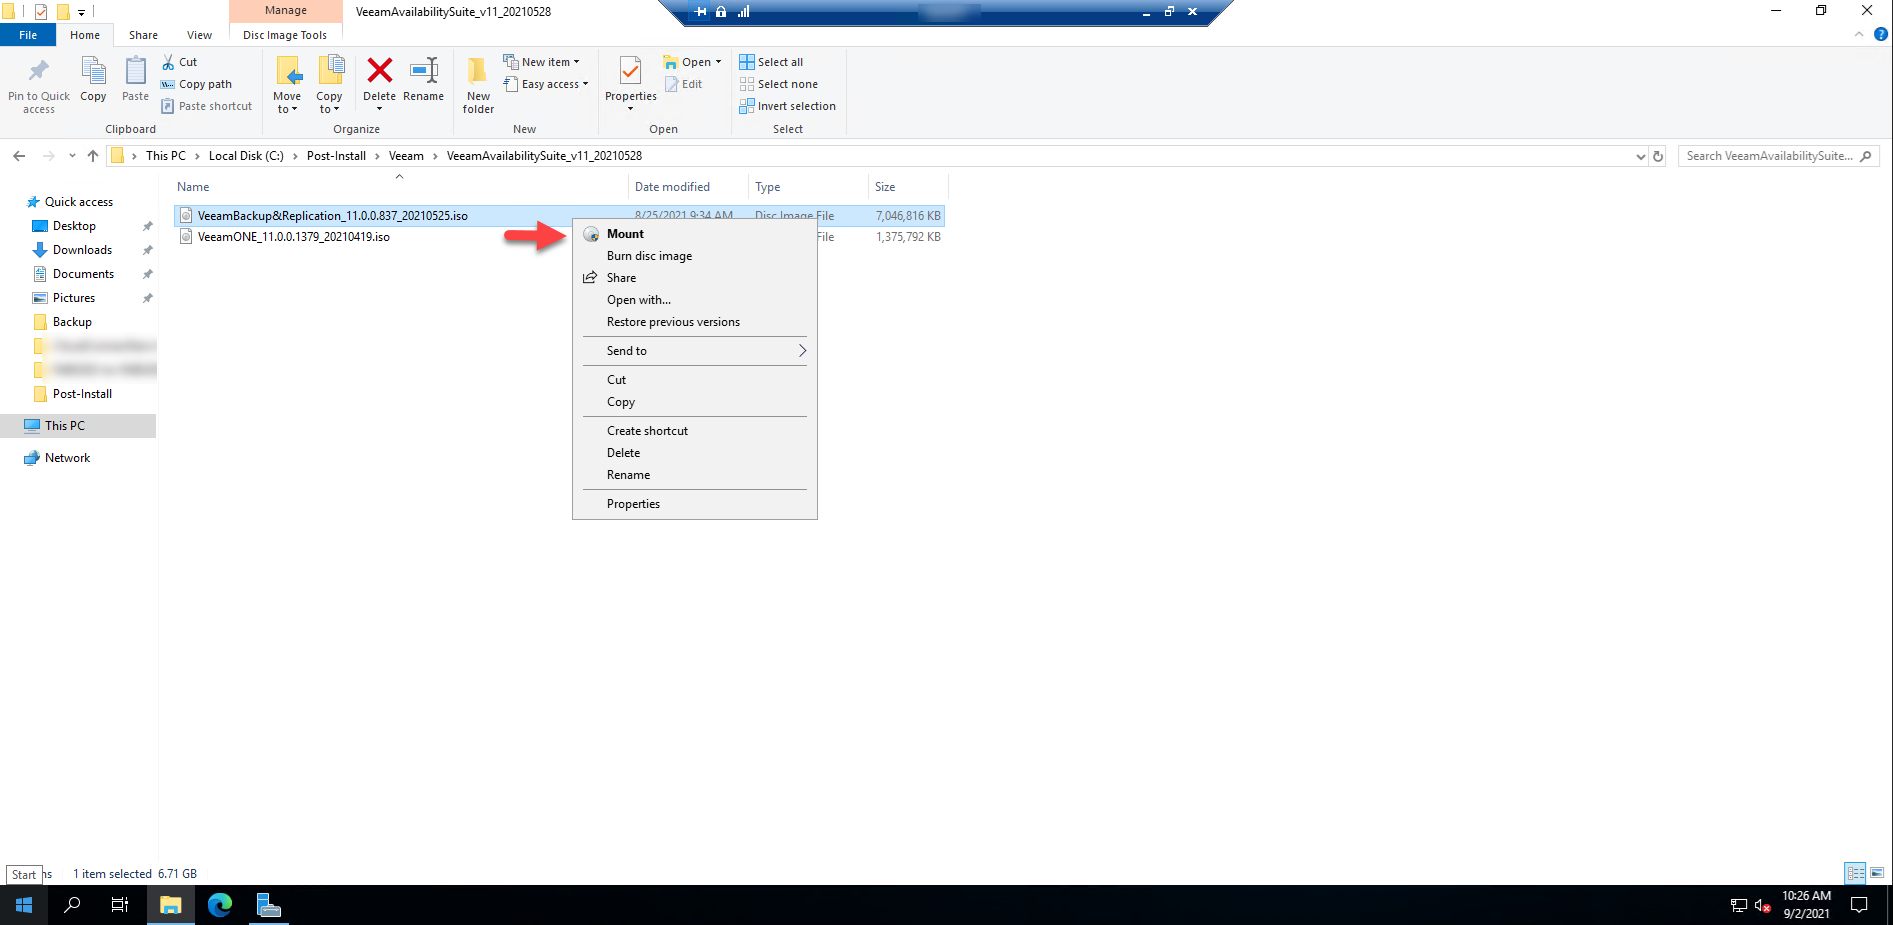 120821 1718 HowtoUpgrad3 - How to Upgrade Veeam Backup and Replication from v10 to v11